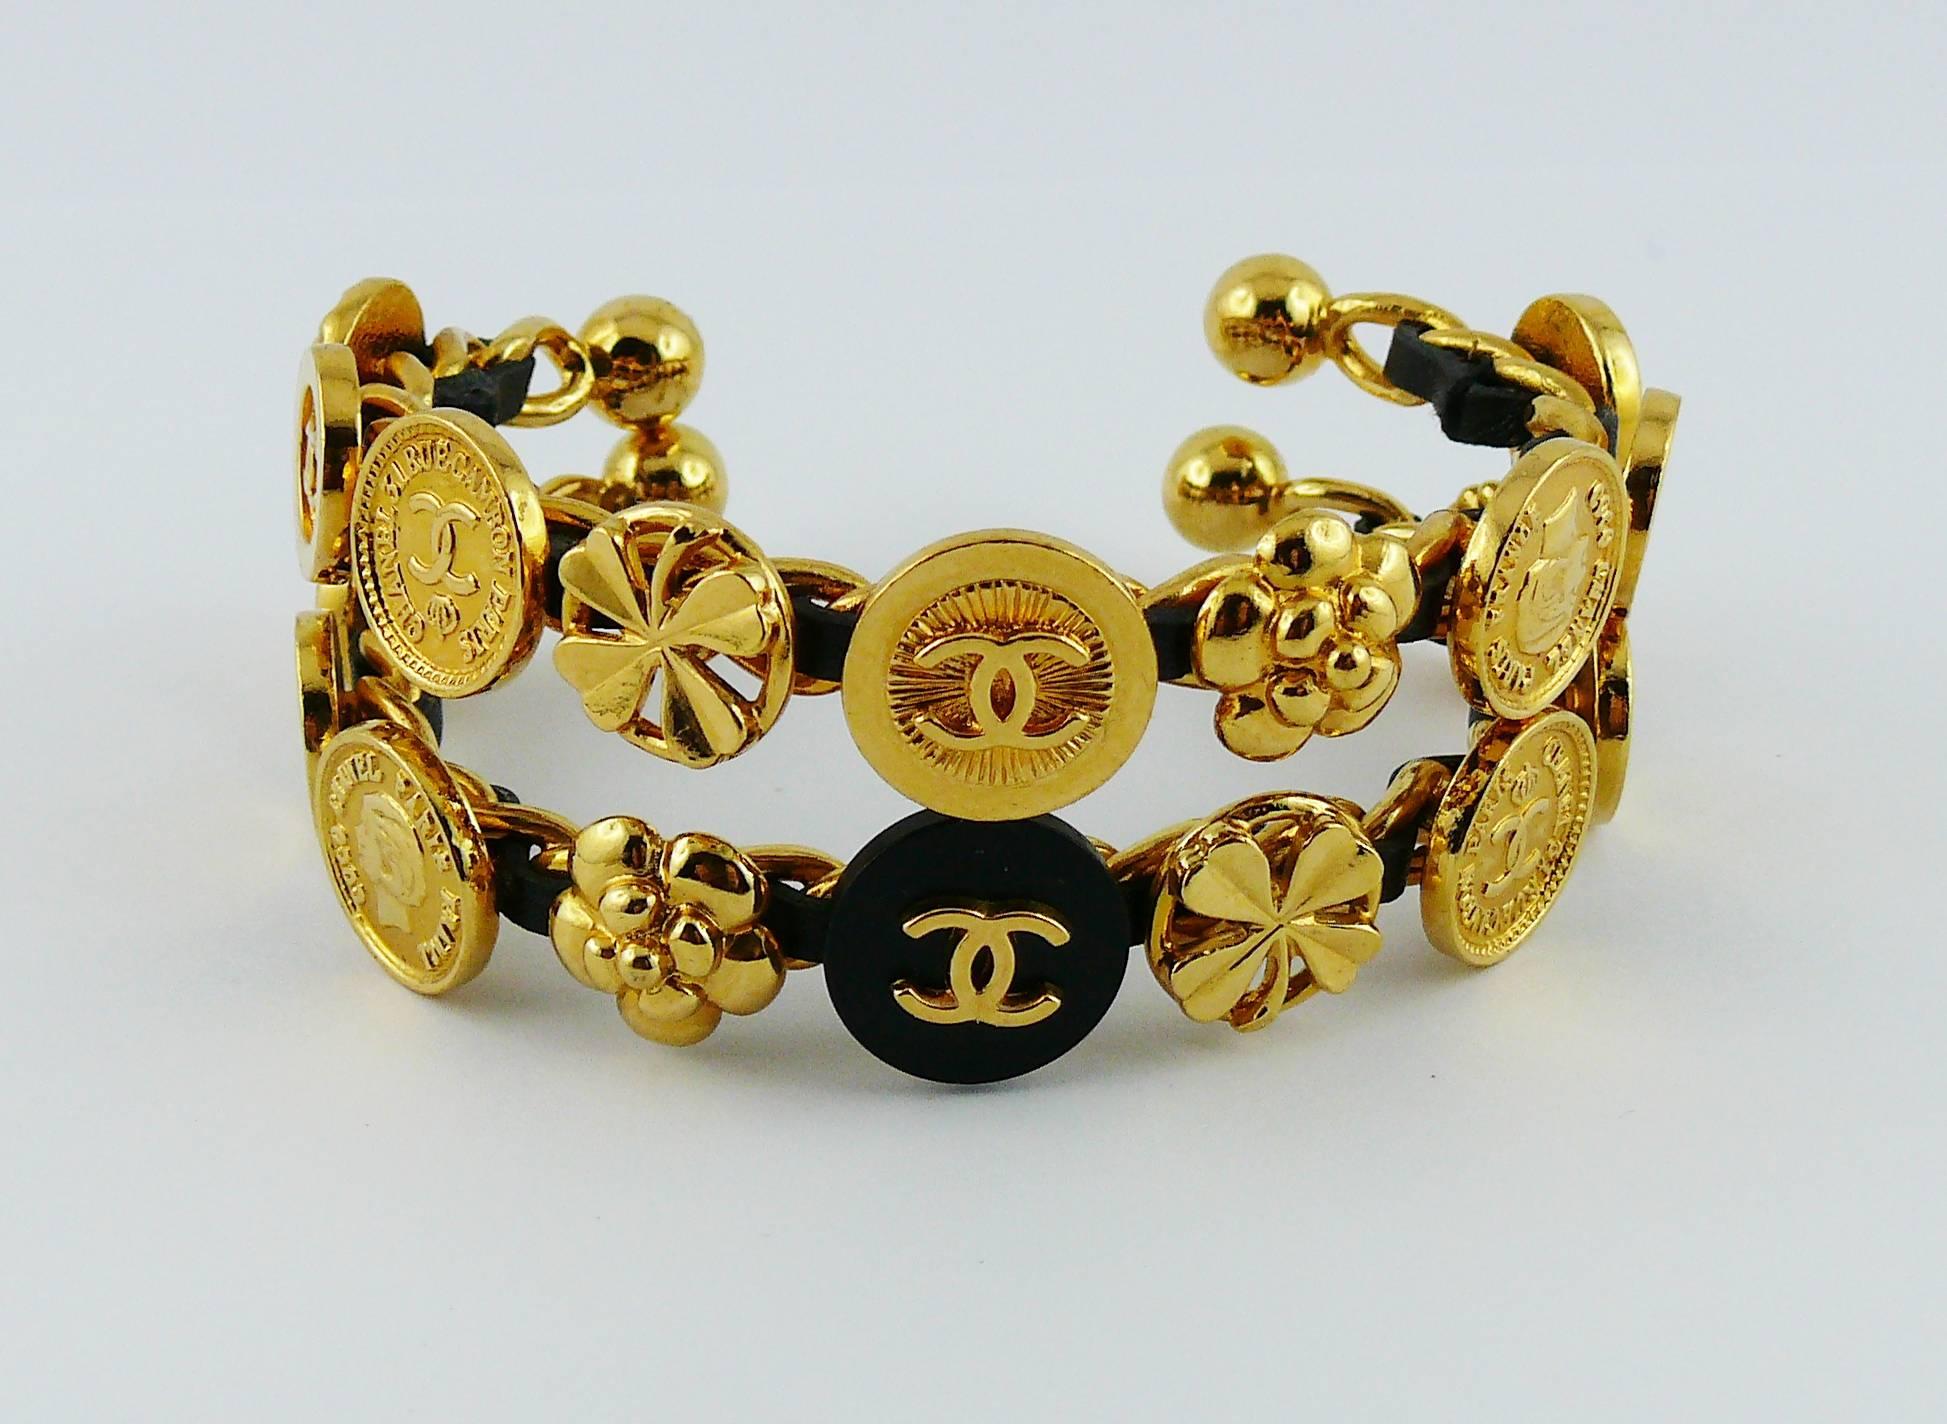 CHANEL vintage rare interwoven gold chain and black leather rigid bracelet set featuring 9 iconic coins.

This set includes 2 bracelets. This is not a real pair as far as coins are a little differents.

NB : Each bracelet are offered